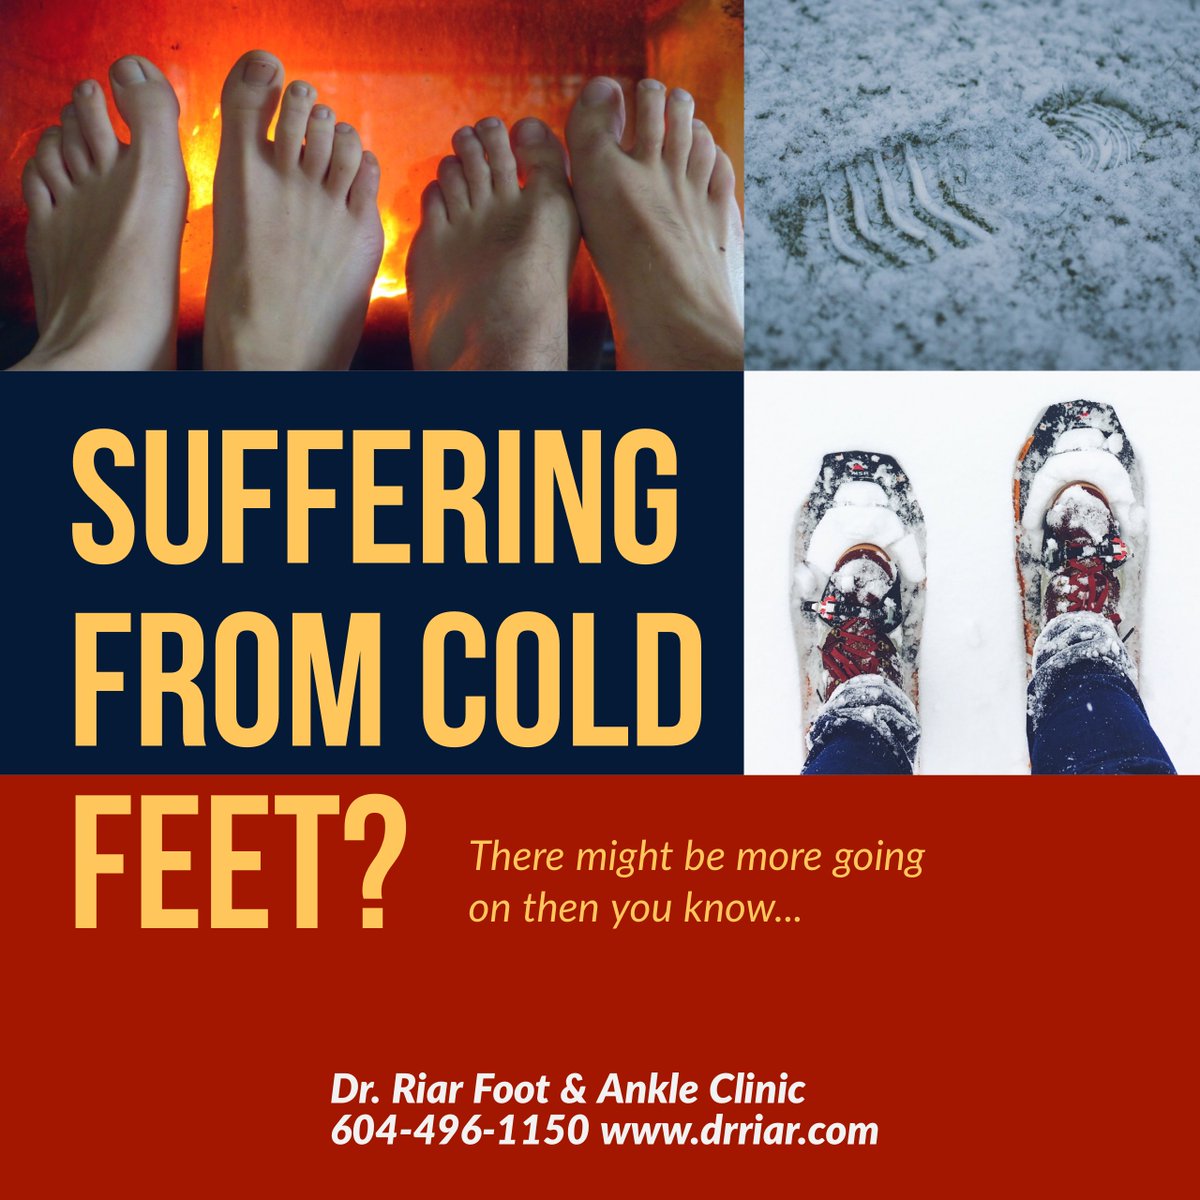 #Coldfeet Poor blood flow in the #legs/#feet such as peripheral vascular disease #PVD Some medications constrict blood vessels #hormonalabnormalities #hypothyroidism #adrenalinsufficiency #nervedisorders peripheral neuropathy #fibromyalgia #autoimmunedisorders Visit a #Podiatrist